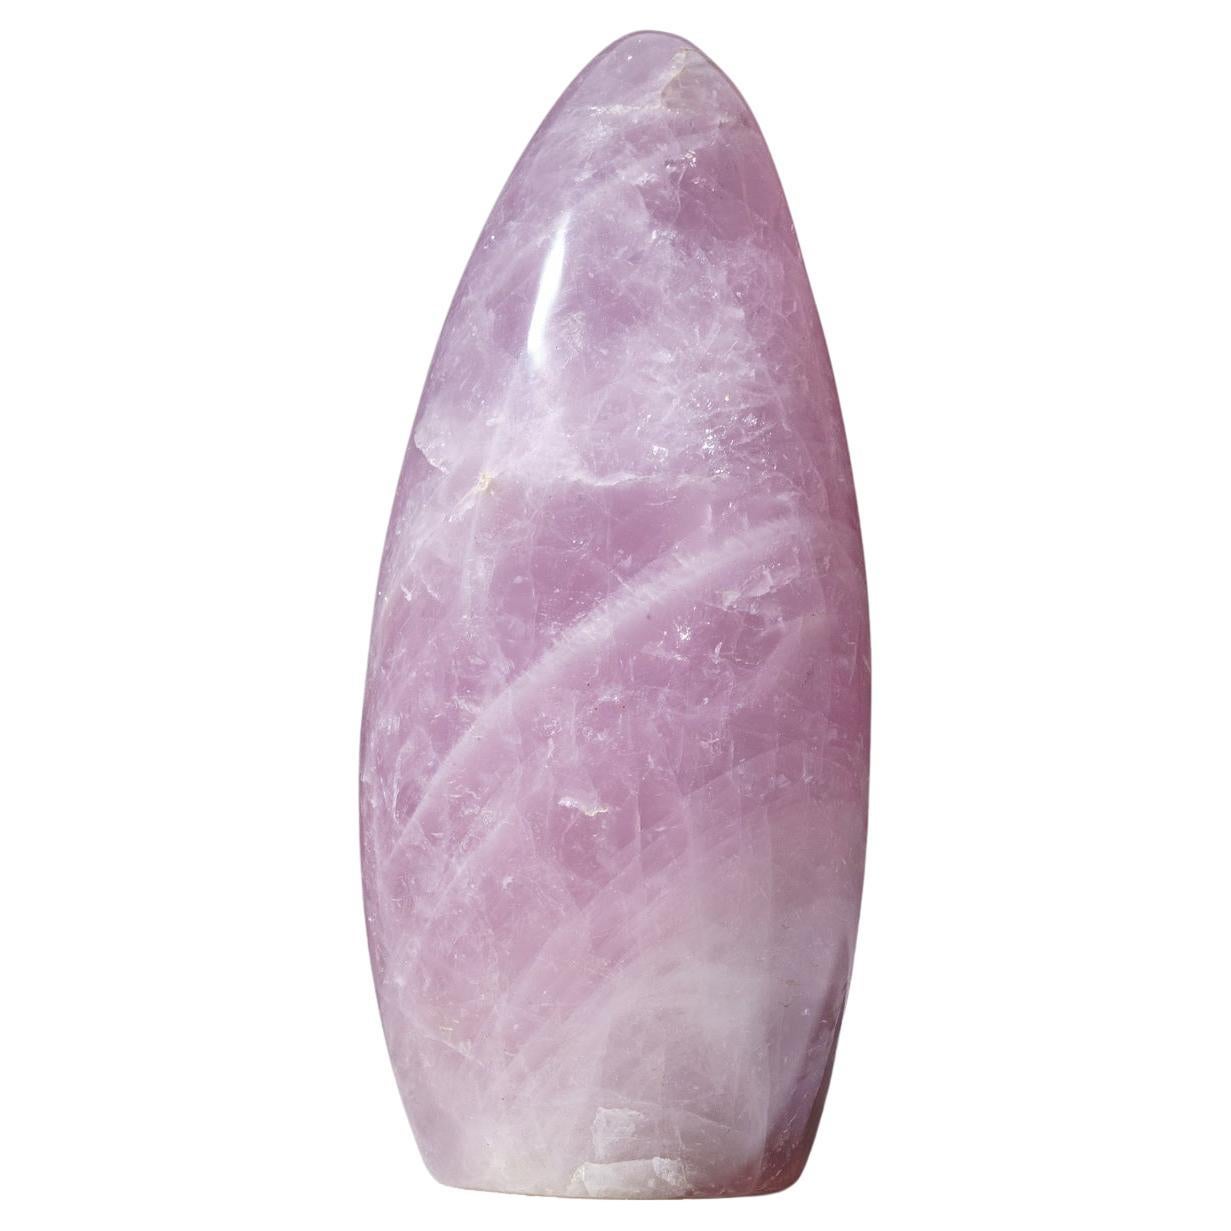 Polished Rose Quartz Freeform From Brazil (19.2 lbs) For Sale at 1stDibs